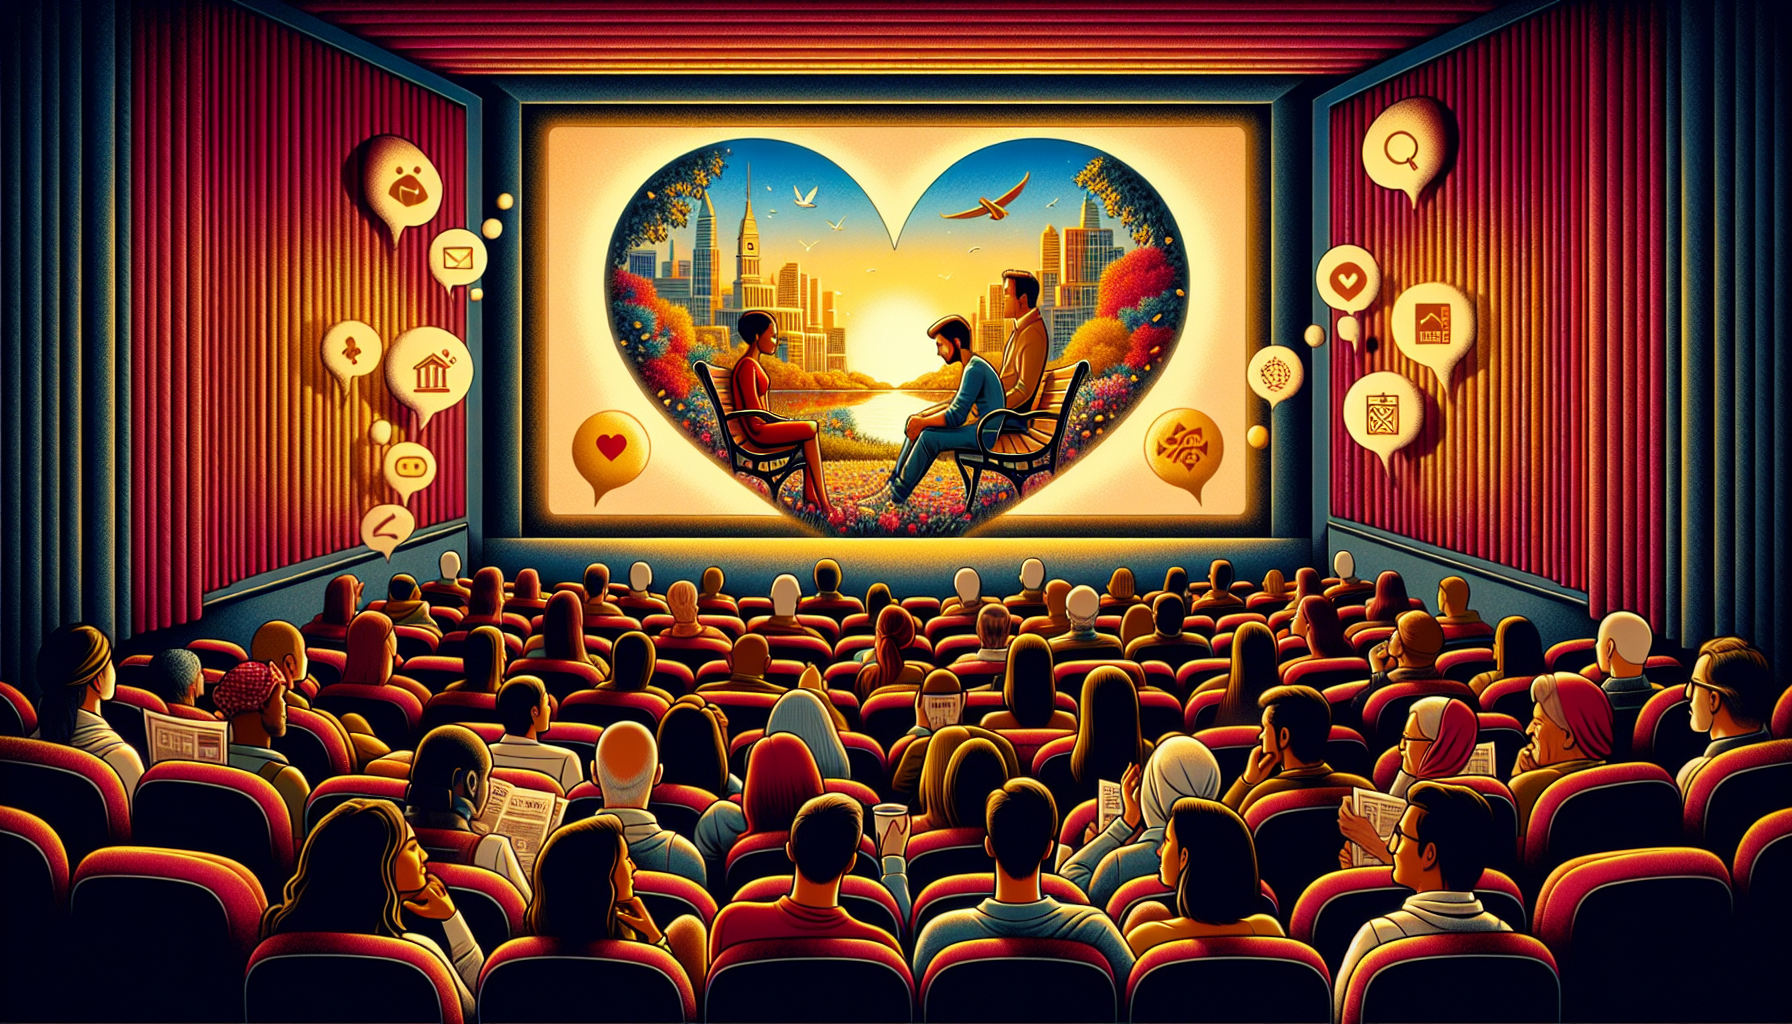 An artistic movie poster featuring a diverse group of people sitting in a cozy, dimly lit cinema, with a heart-shaped screen showing a scene from a romance film where the characters are in an intense